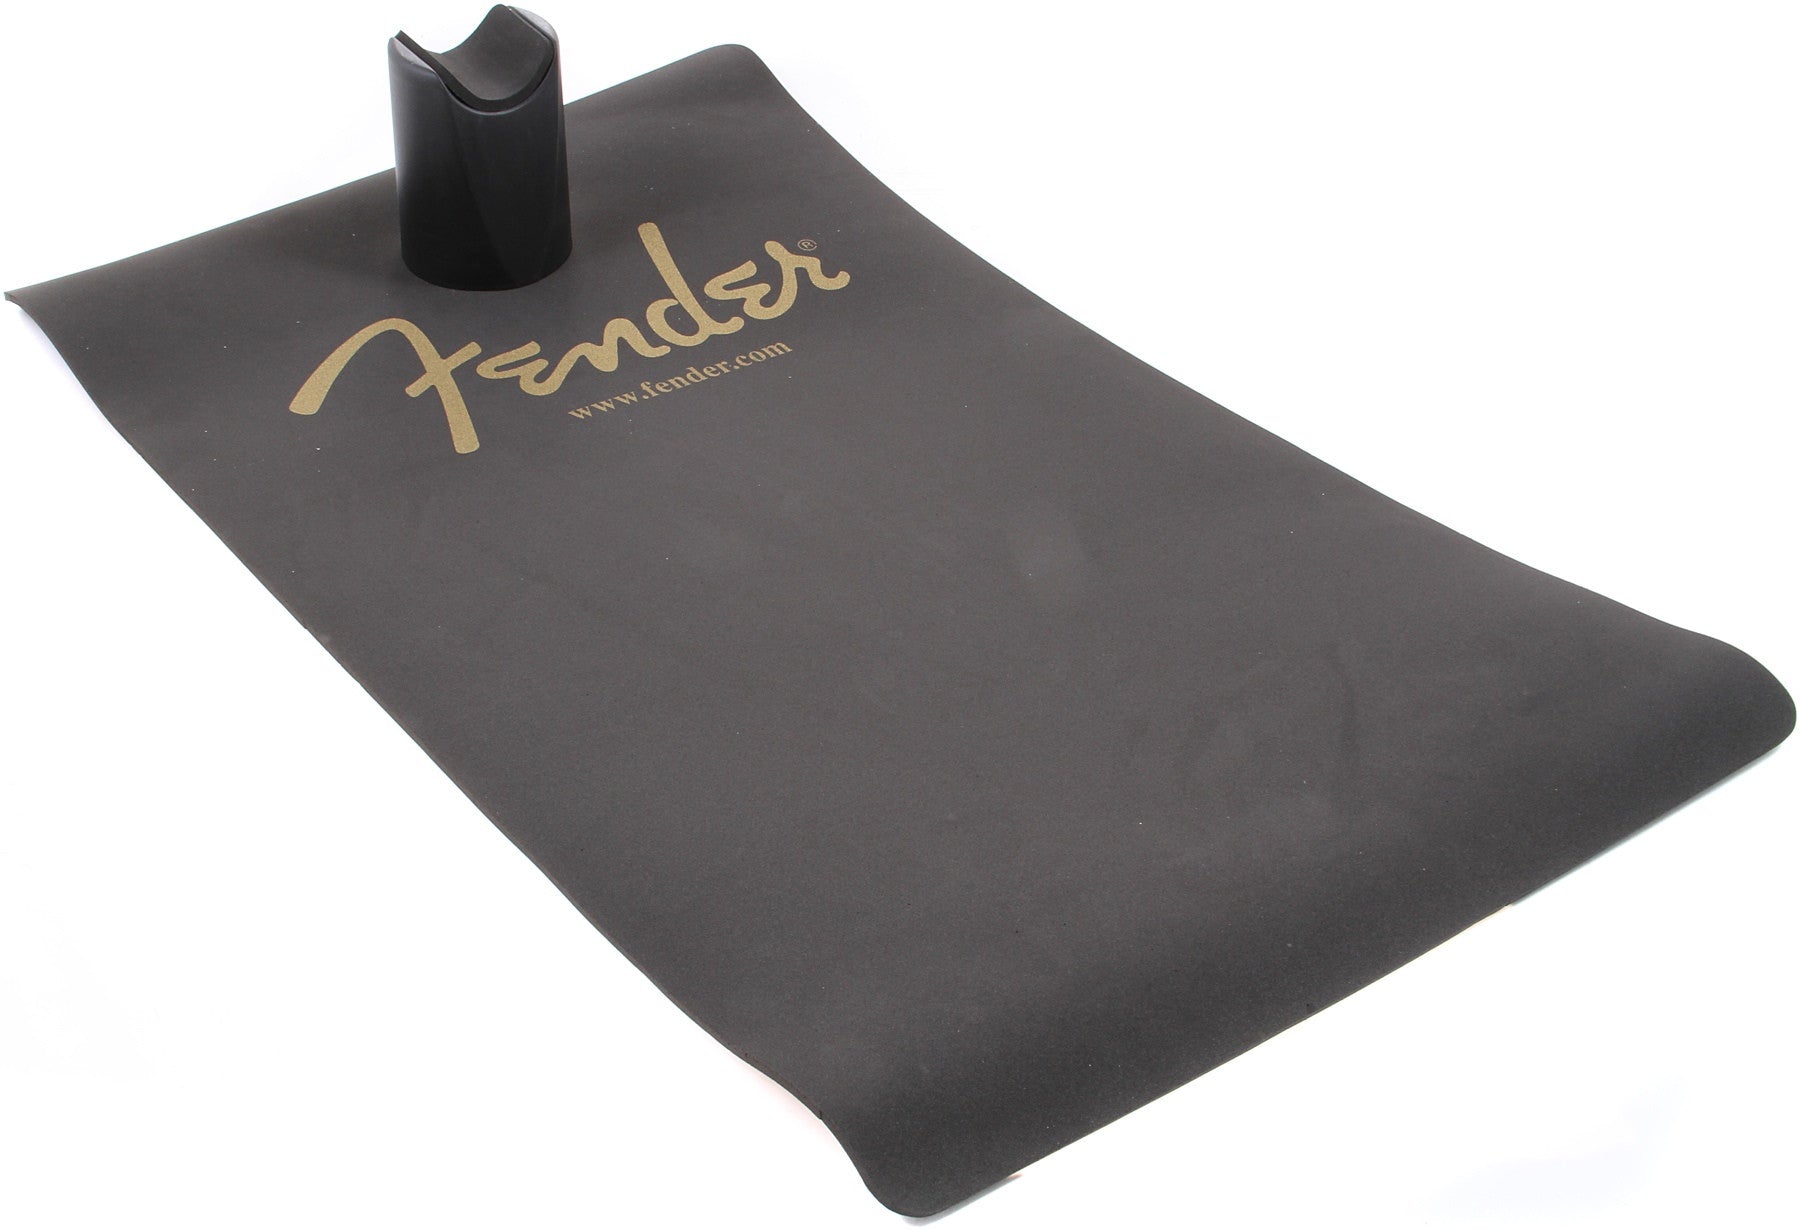 Fender Guitar Work Station Black 0990502000 - L.A. Music - Canada's Favourite Music Store!